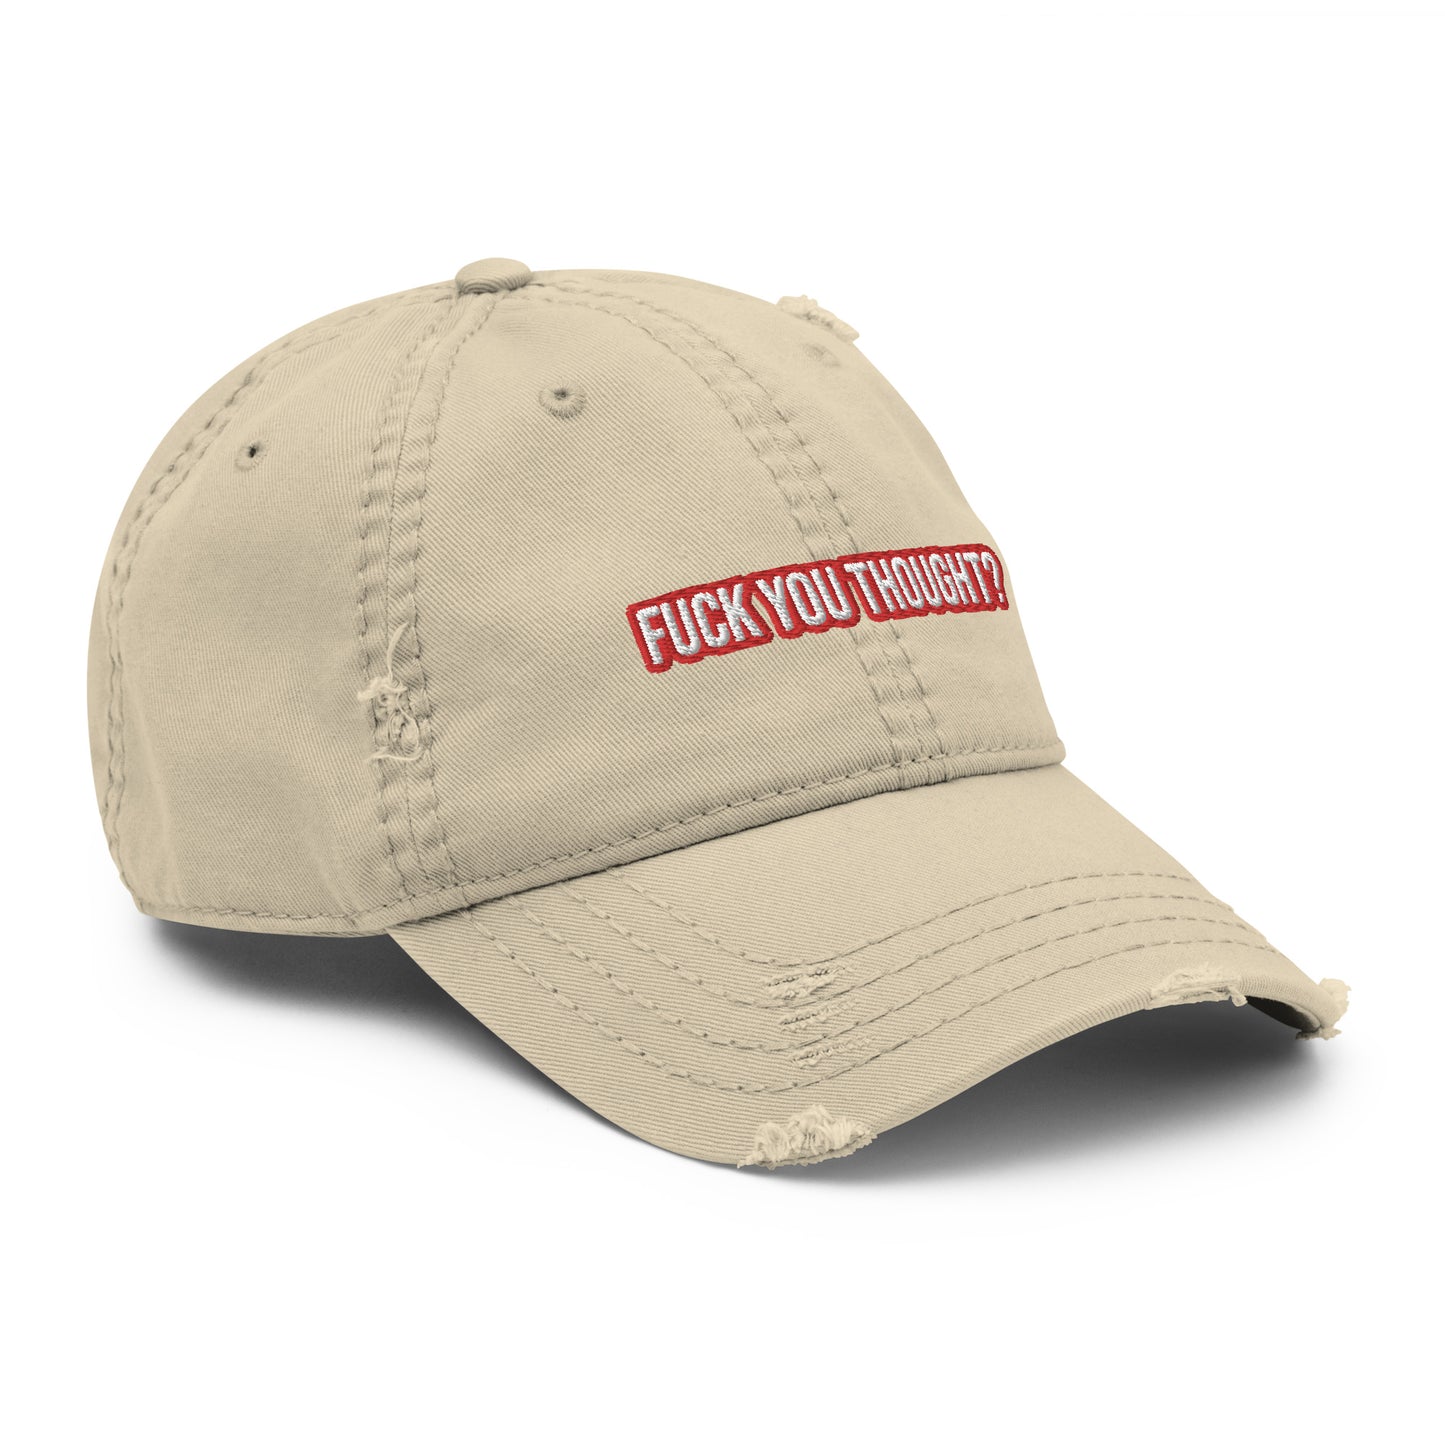 Fuck You Thought Distressed Dad Hat